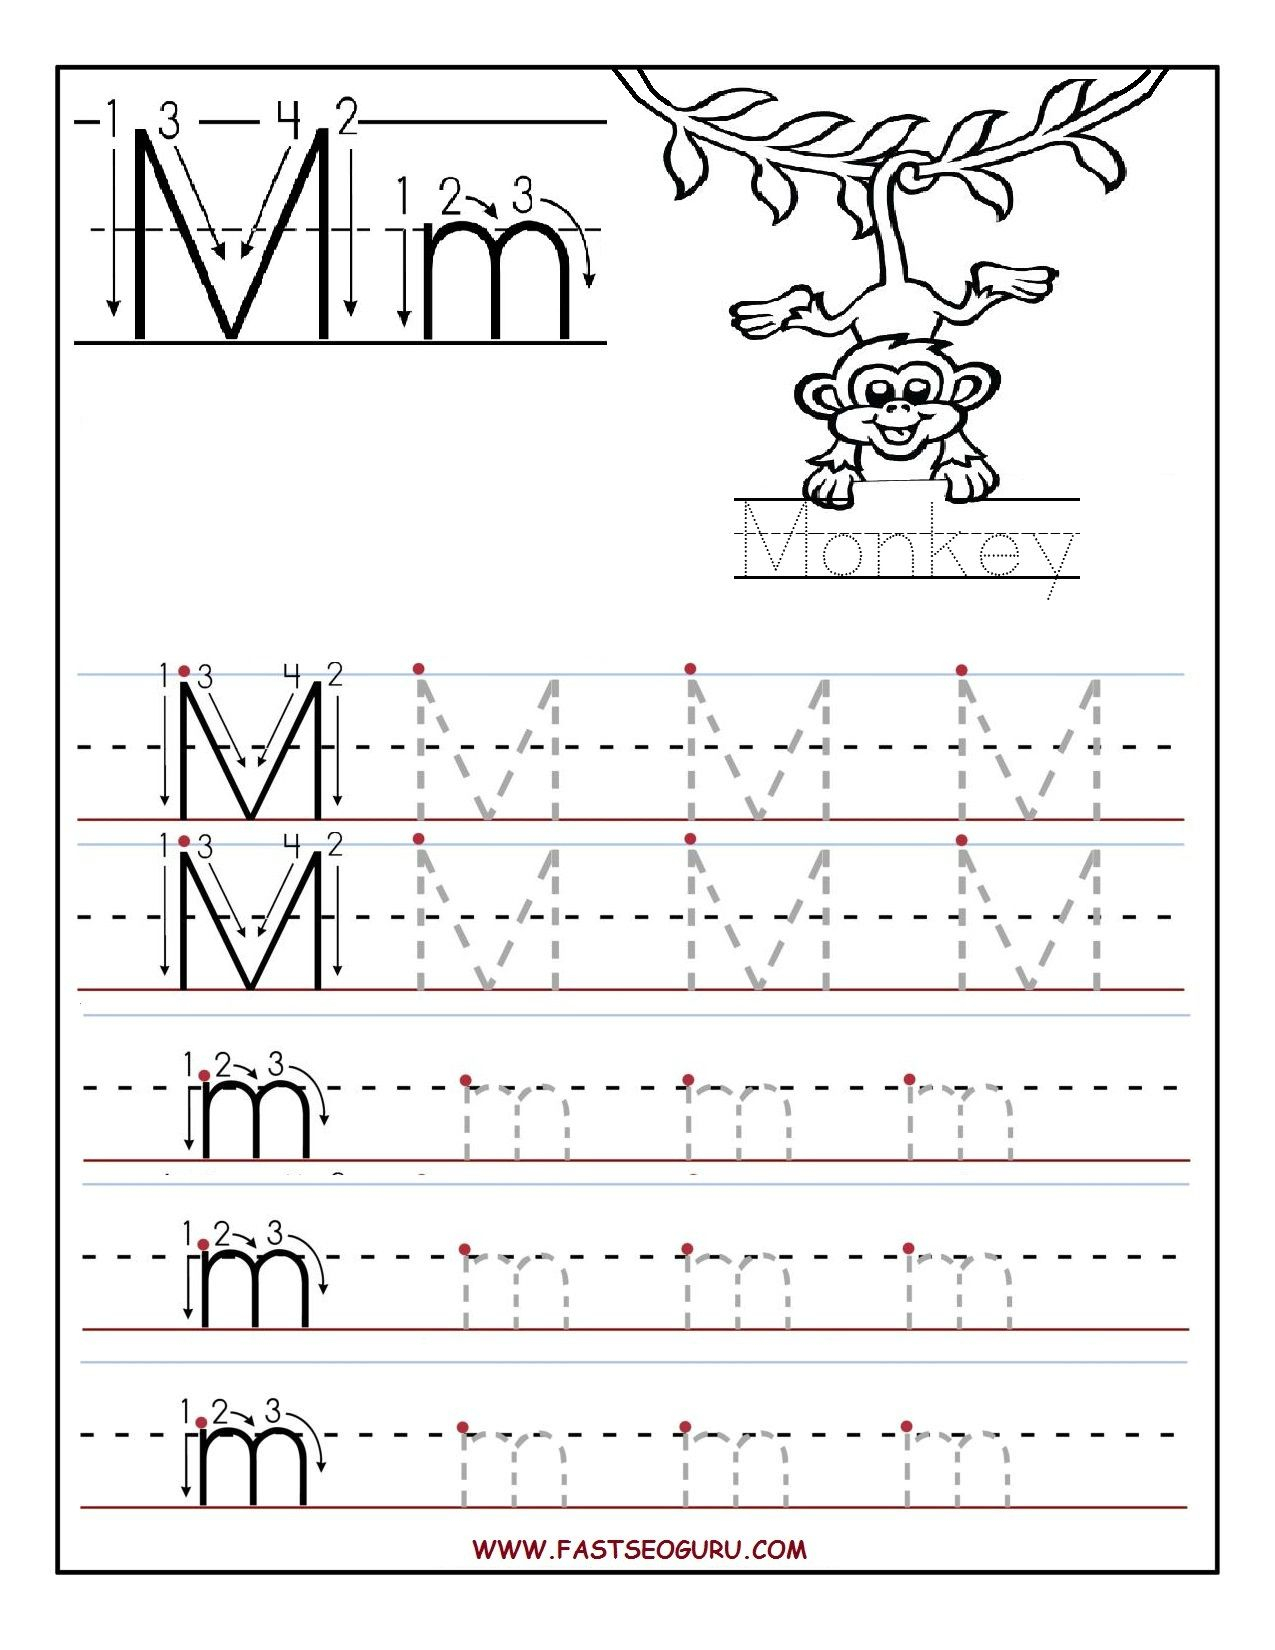 Printable Letter M Tracing Worksheets For Preschool pertaining to Letter M Tracing Printable